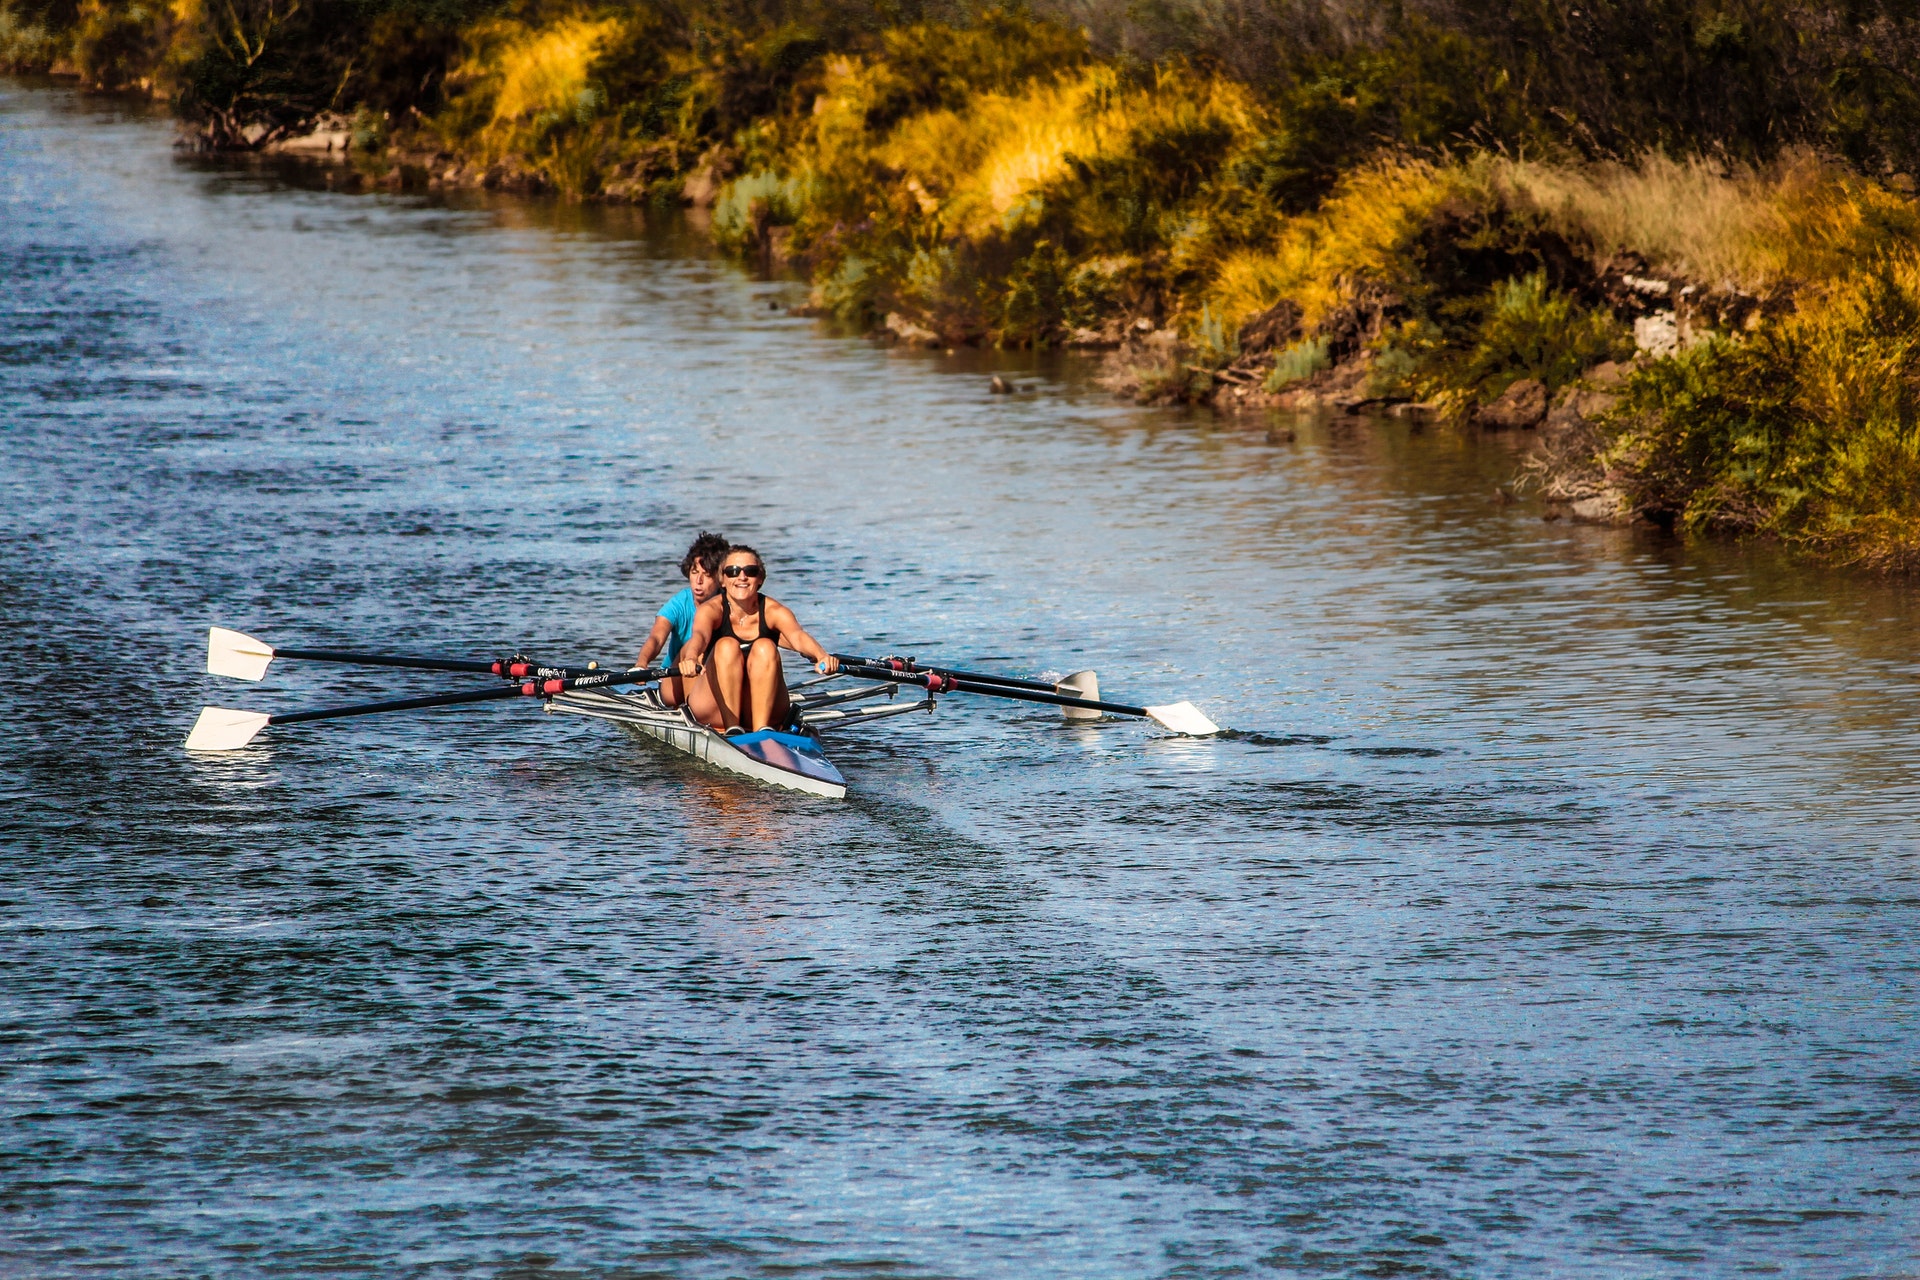 Analyzing Experienced And Inexperienced Rowers With MVN Analyze